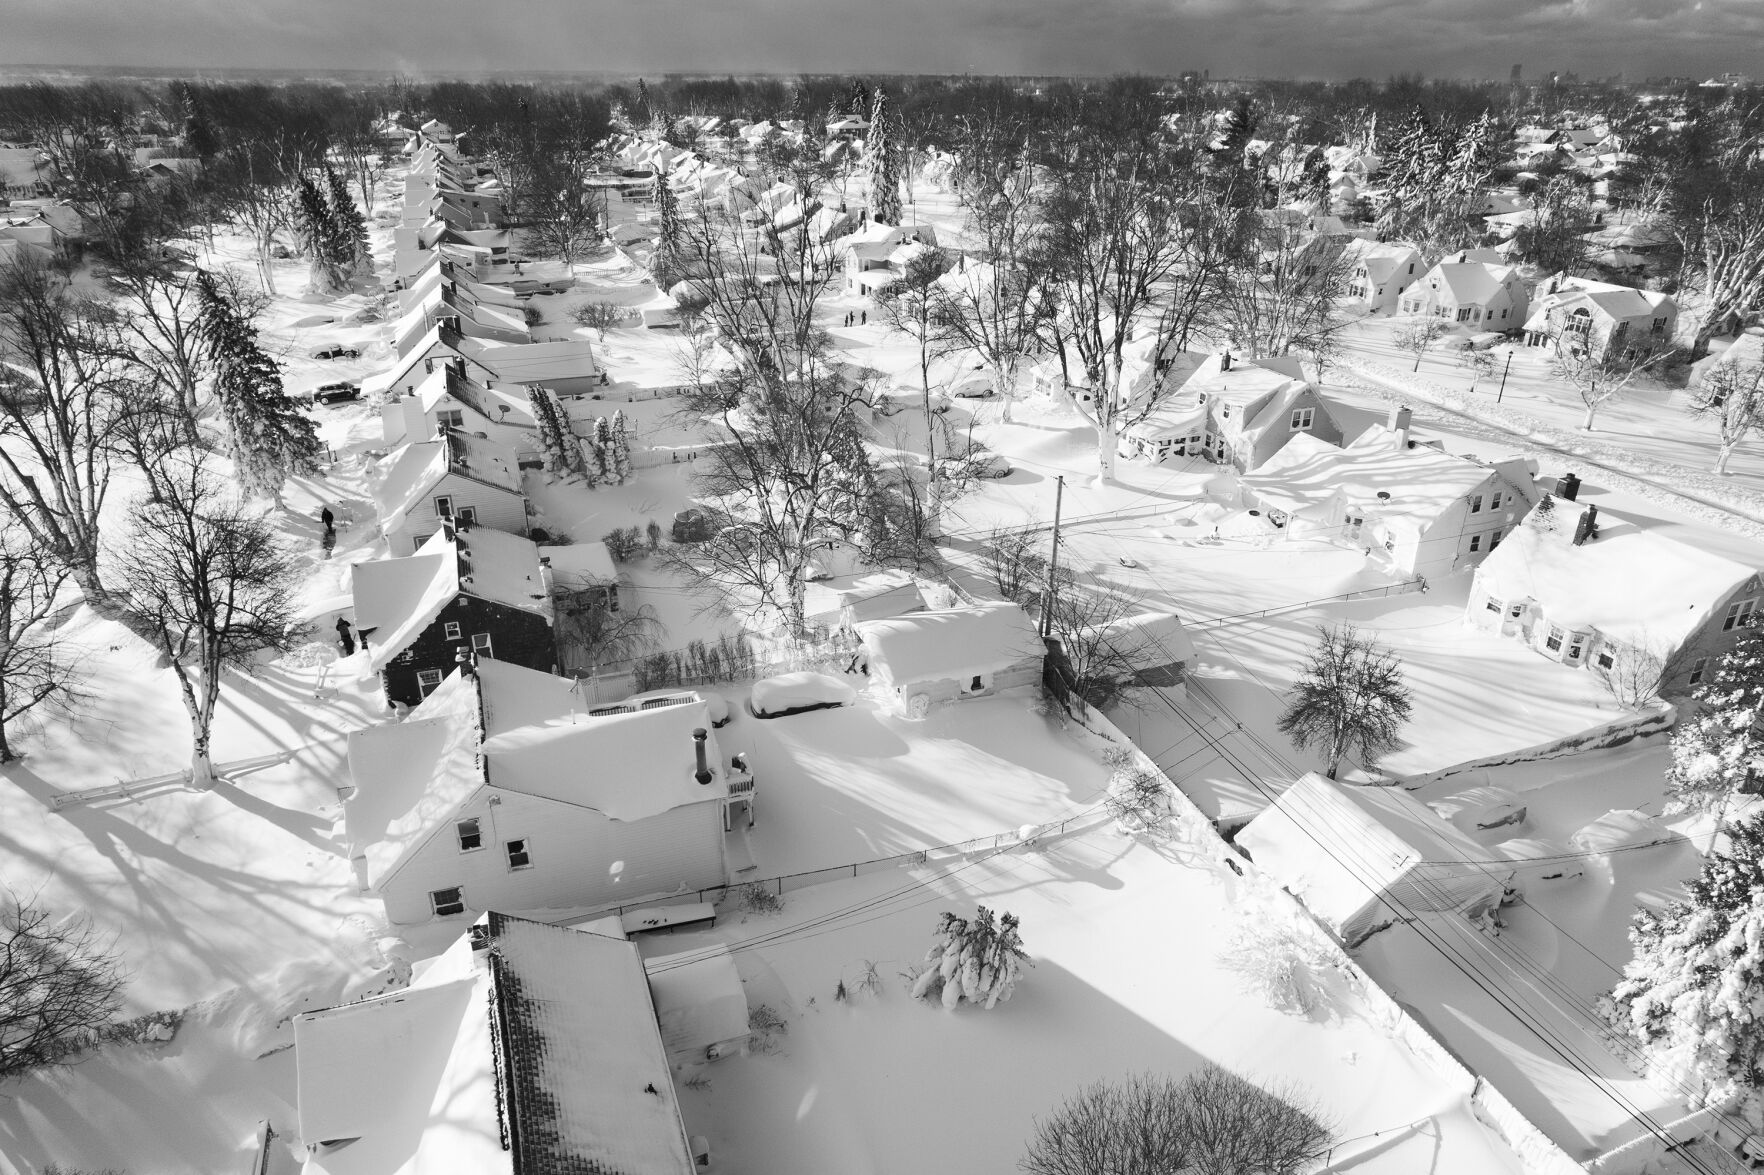 <p>In this drone image, snow blankets a neighborhood, Sunday, Dec. 25, 2022, in Cheektowaga, N.Y. Millions of people hunkered down against a deep freeze Sunday morning to ride out the frigid storm that has killed at least 24 people across the United States and is expected to claim more lives after trapping some residents inside houses with heaping snow drifts and knocking out power to several hundred thousand homes and businesses.(John Waller via AP)</p>   PHOTO CREDIT: John Waller